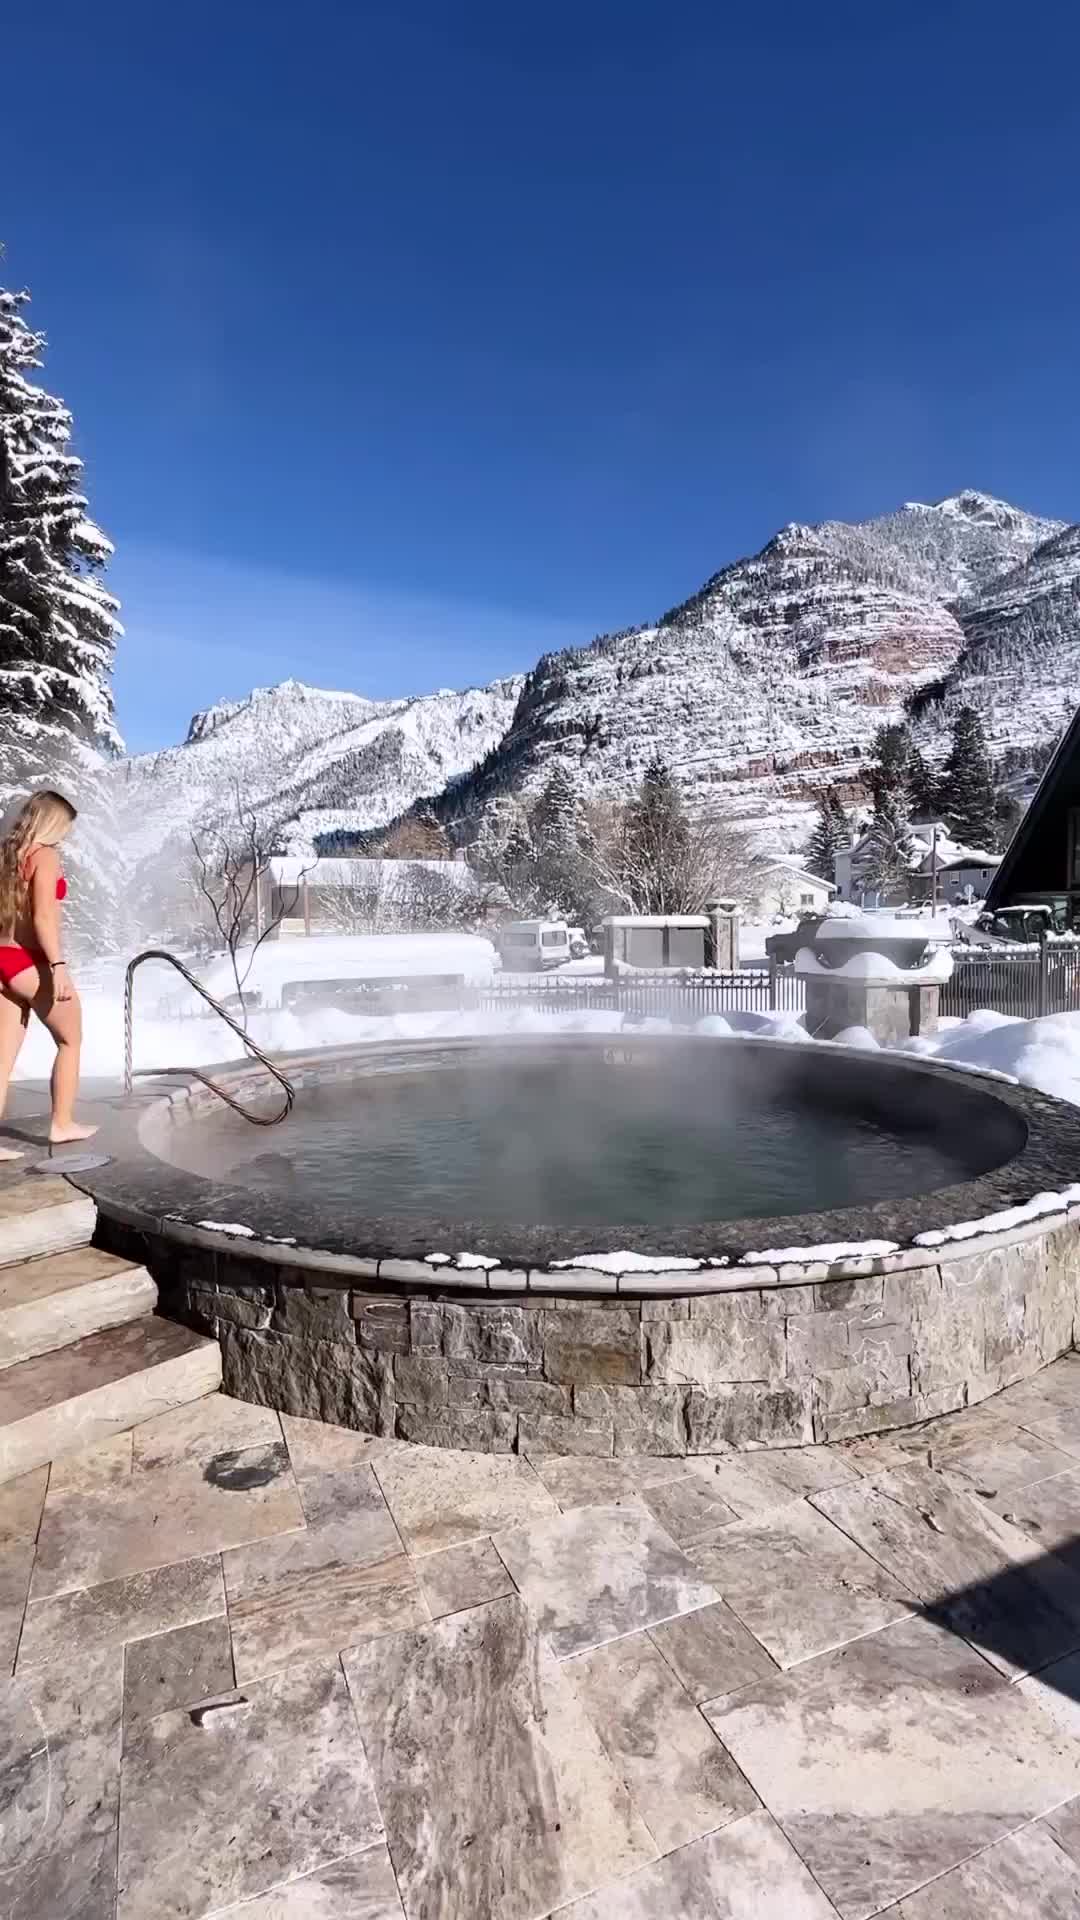 Discover Ouray: Hot Springs & Epic Ice Climbing Adventures